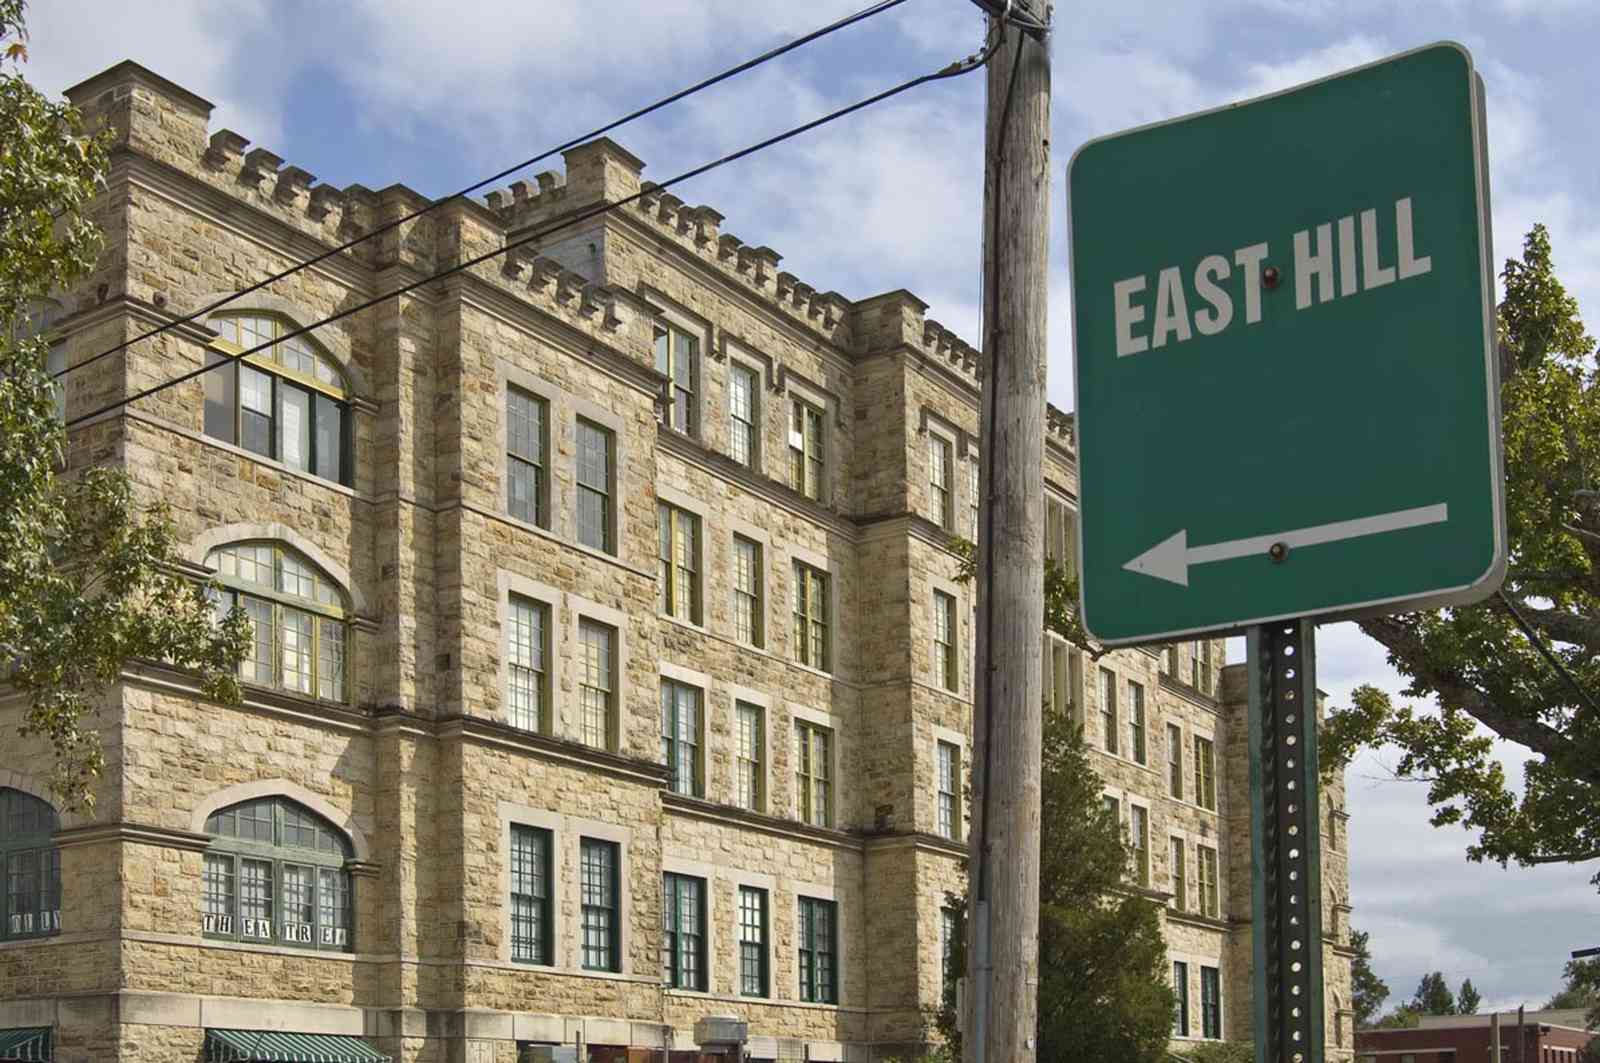 East+Hill_01+WEB.jpg:  sign, historic neighborhood, hospital, romanesque architecture, rough-cut stones, rounded arches, crenelated parapets, 